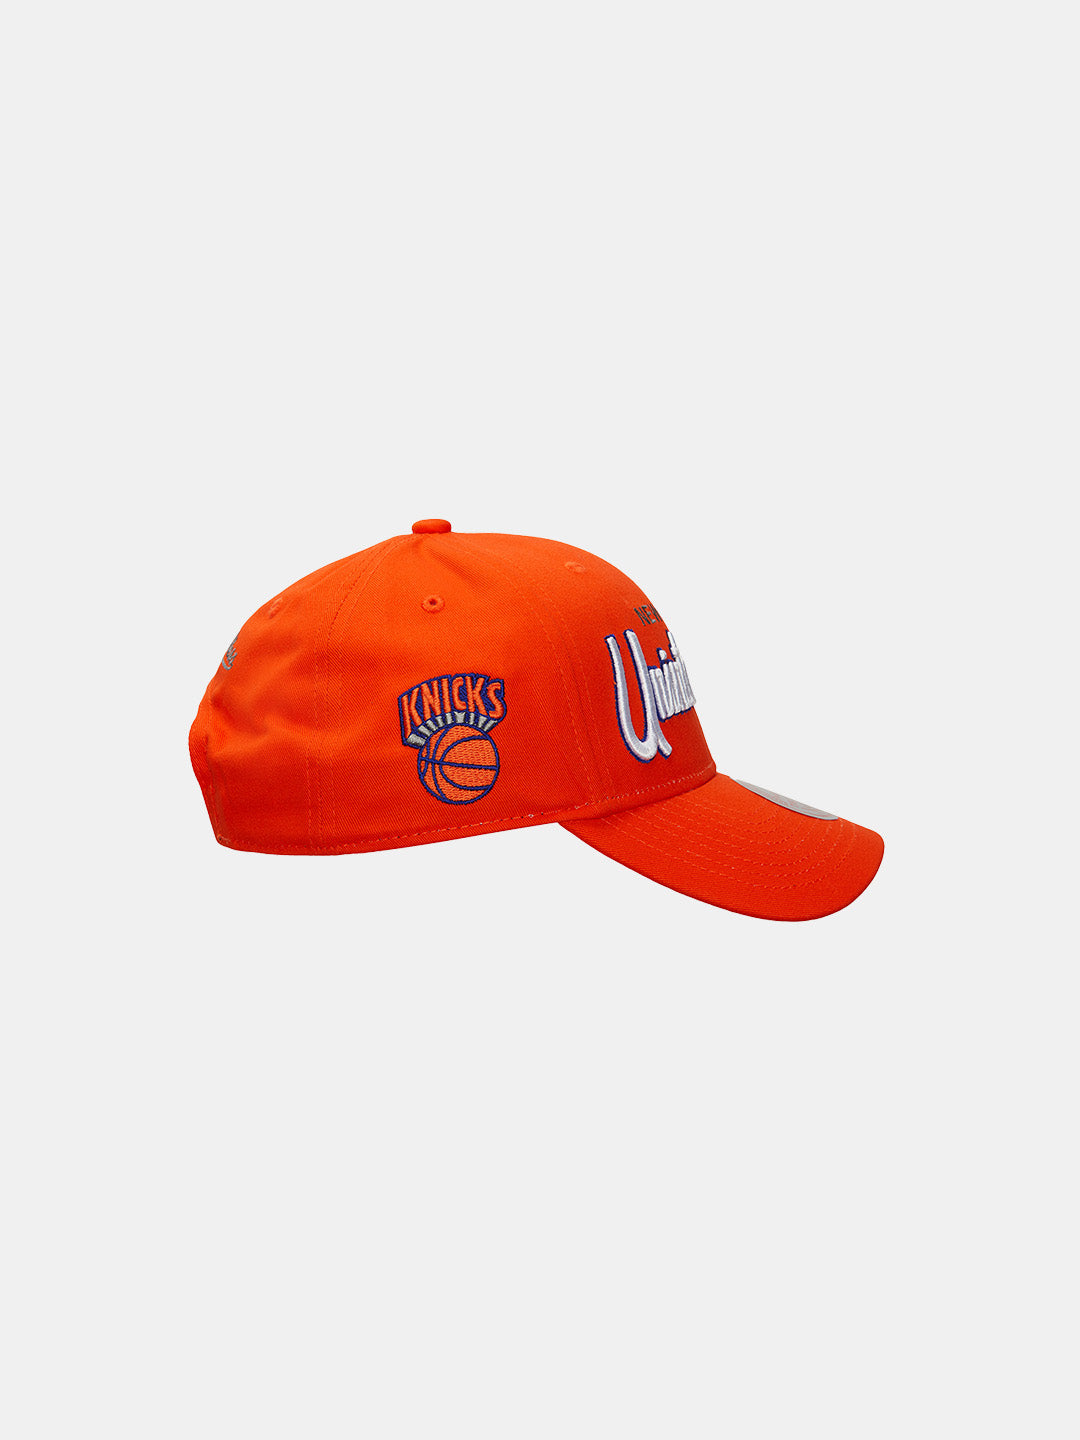 side view of the hat with the knicks emblem